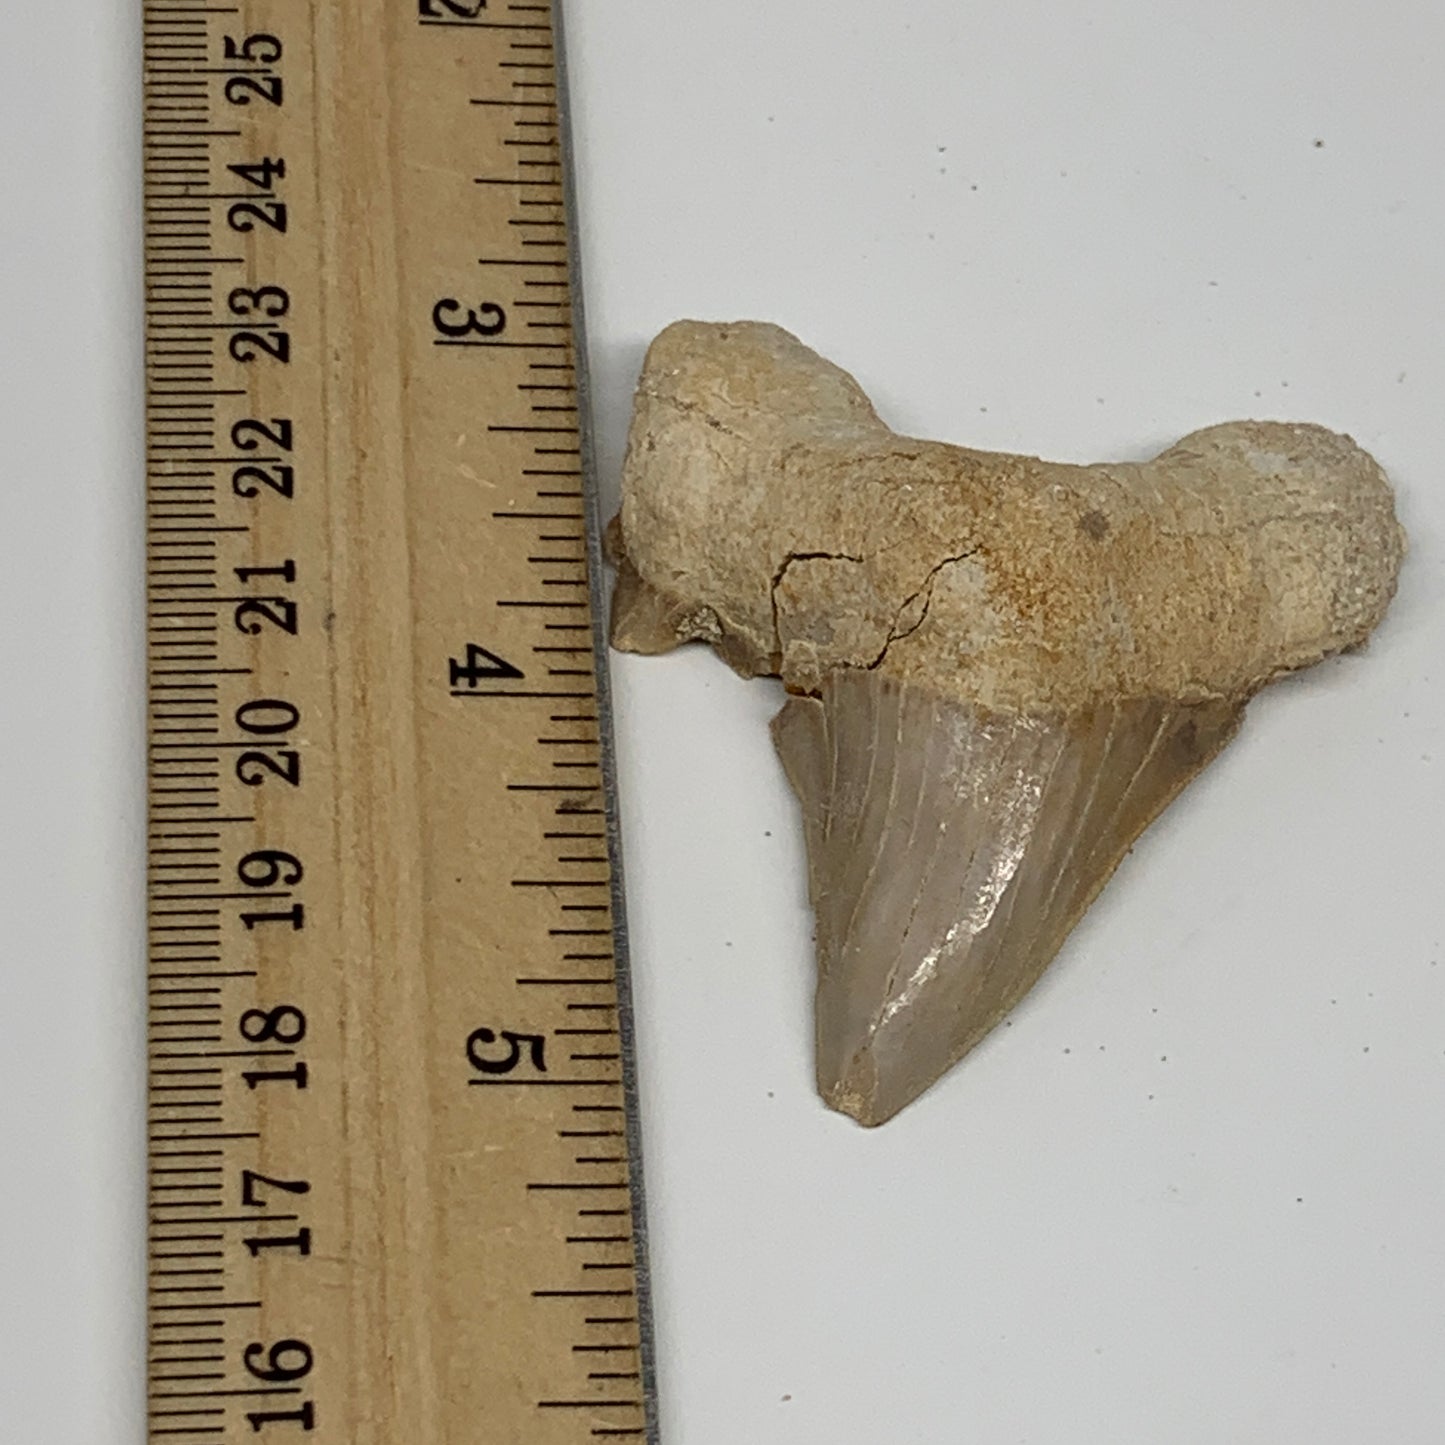 24g, 2"X 1.9"x 0.6" Natural Fossils Fish Shark Tooth @Morocco, B12718